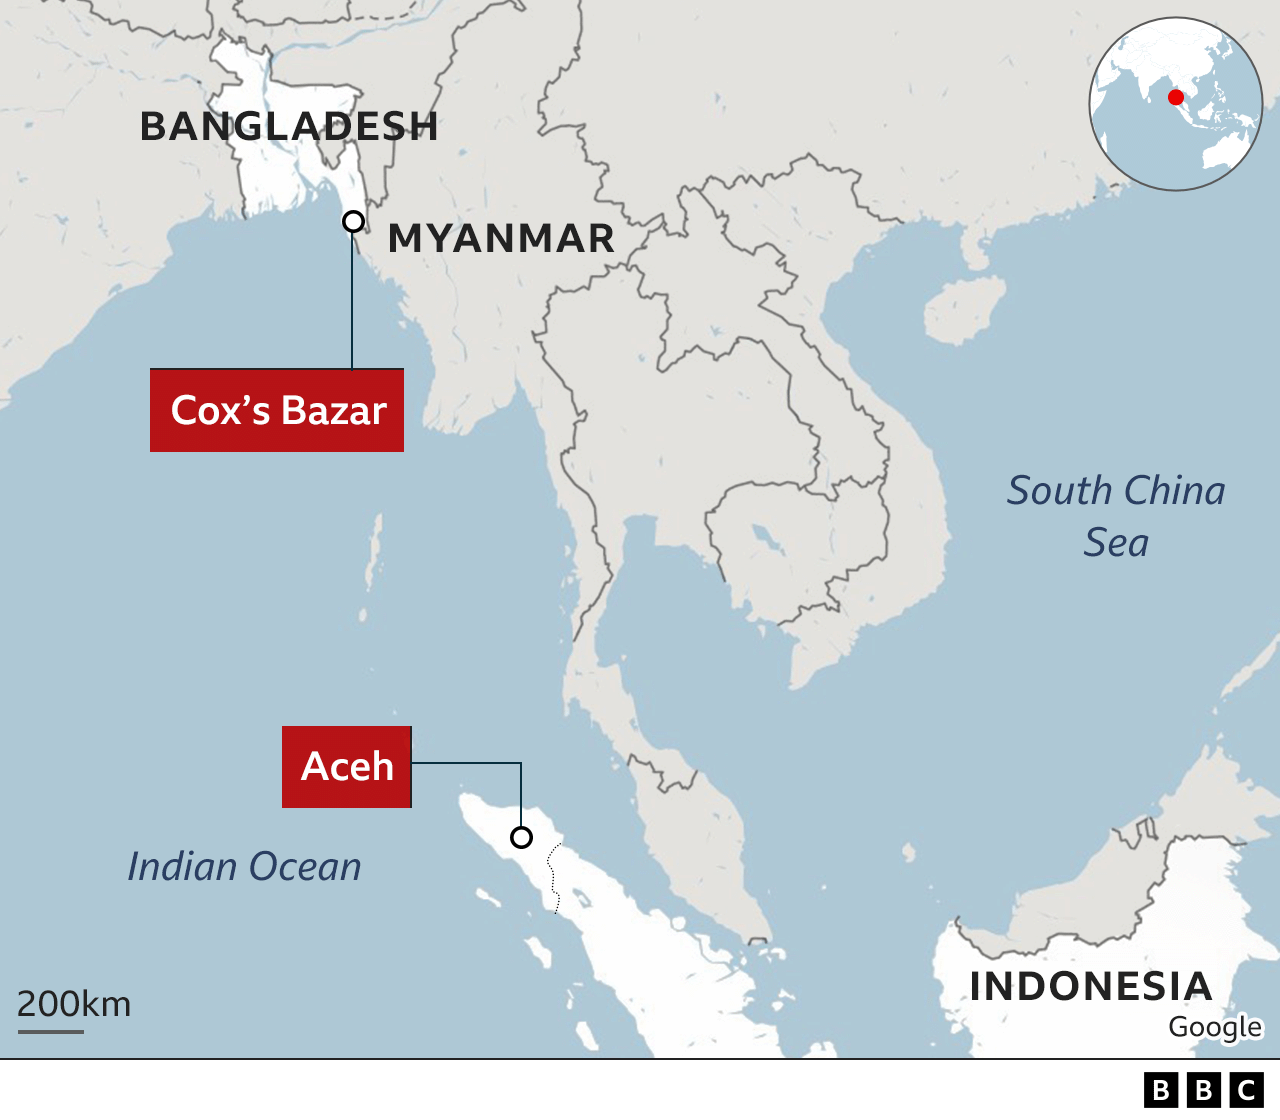 Map of Cox's Bazar in Bangladesh and Aceh in Indonesia